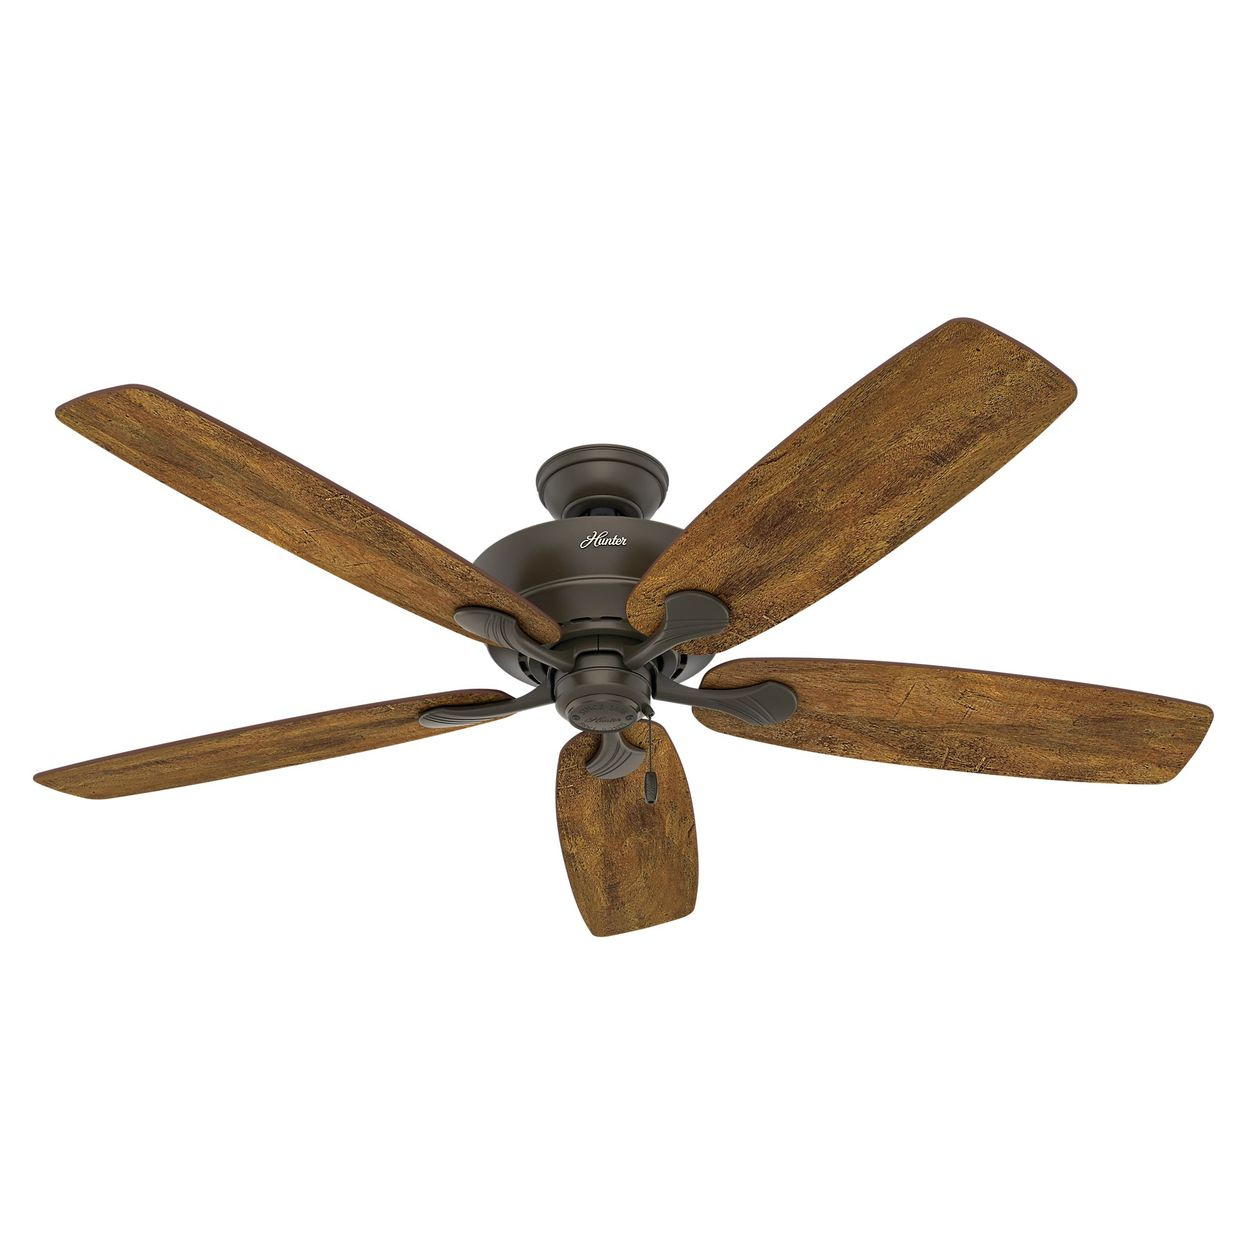 Regalia Ii 60 In Satin Bronze Led Indoor Ceiling Fan With Light Kit 5 Blade pertaining to dimensions 1250 X 1250